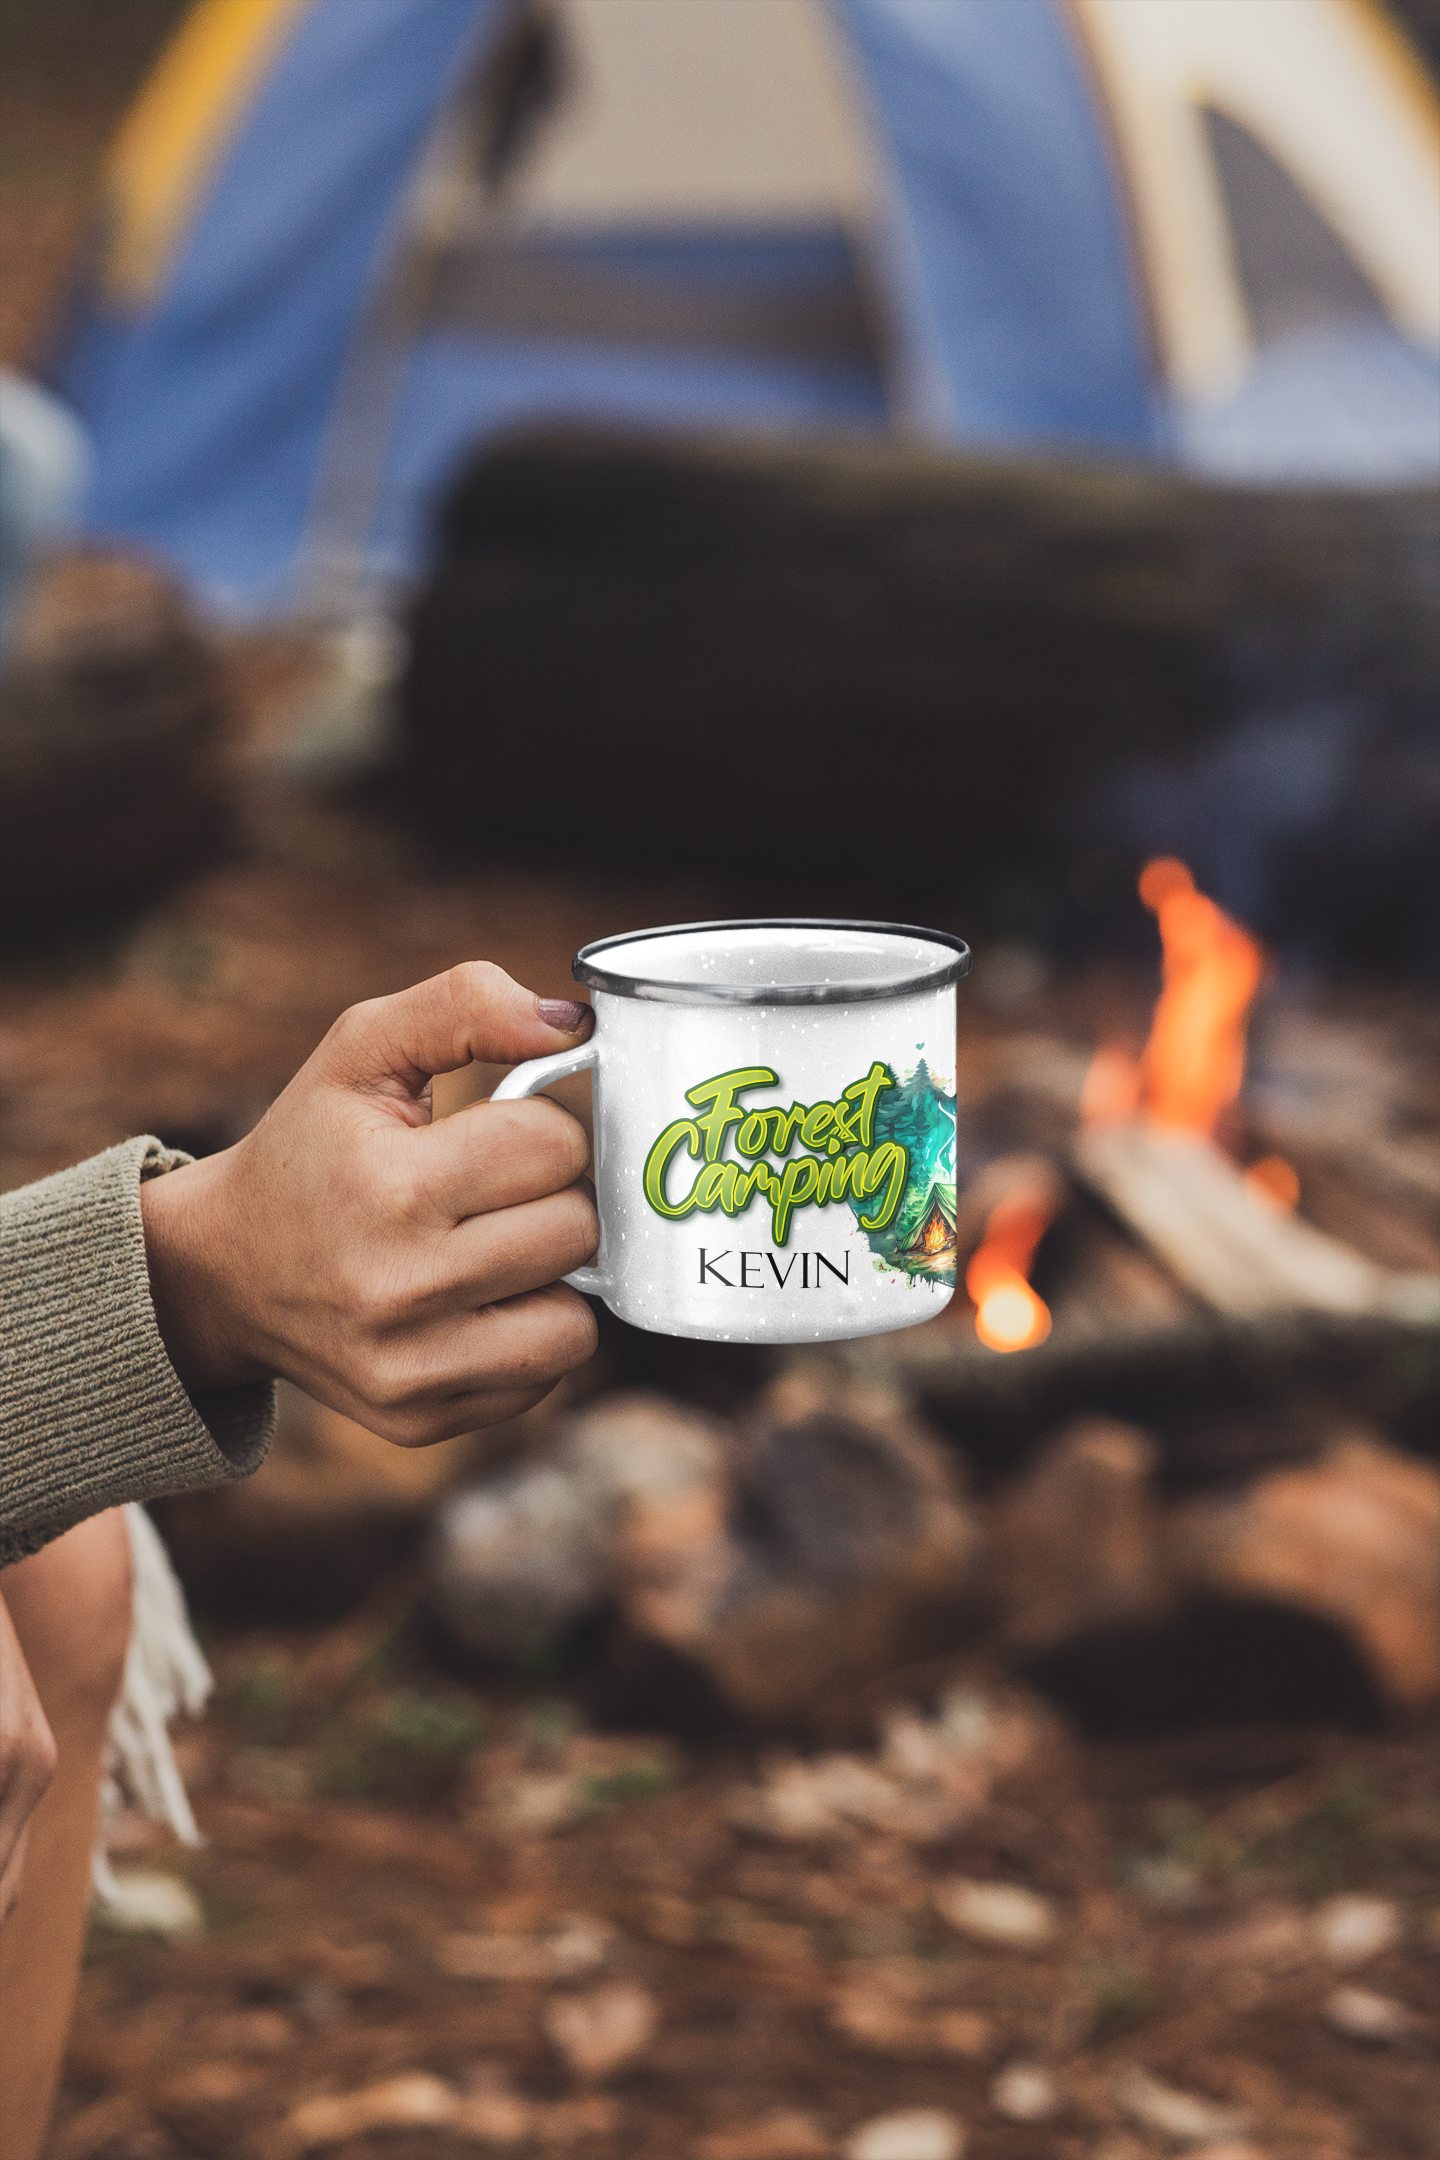 "forest camping" personalisiert  Emailletasse